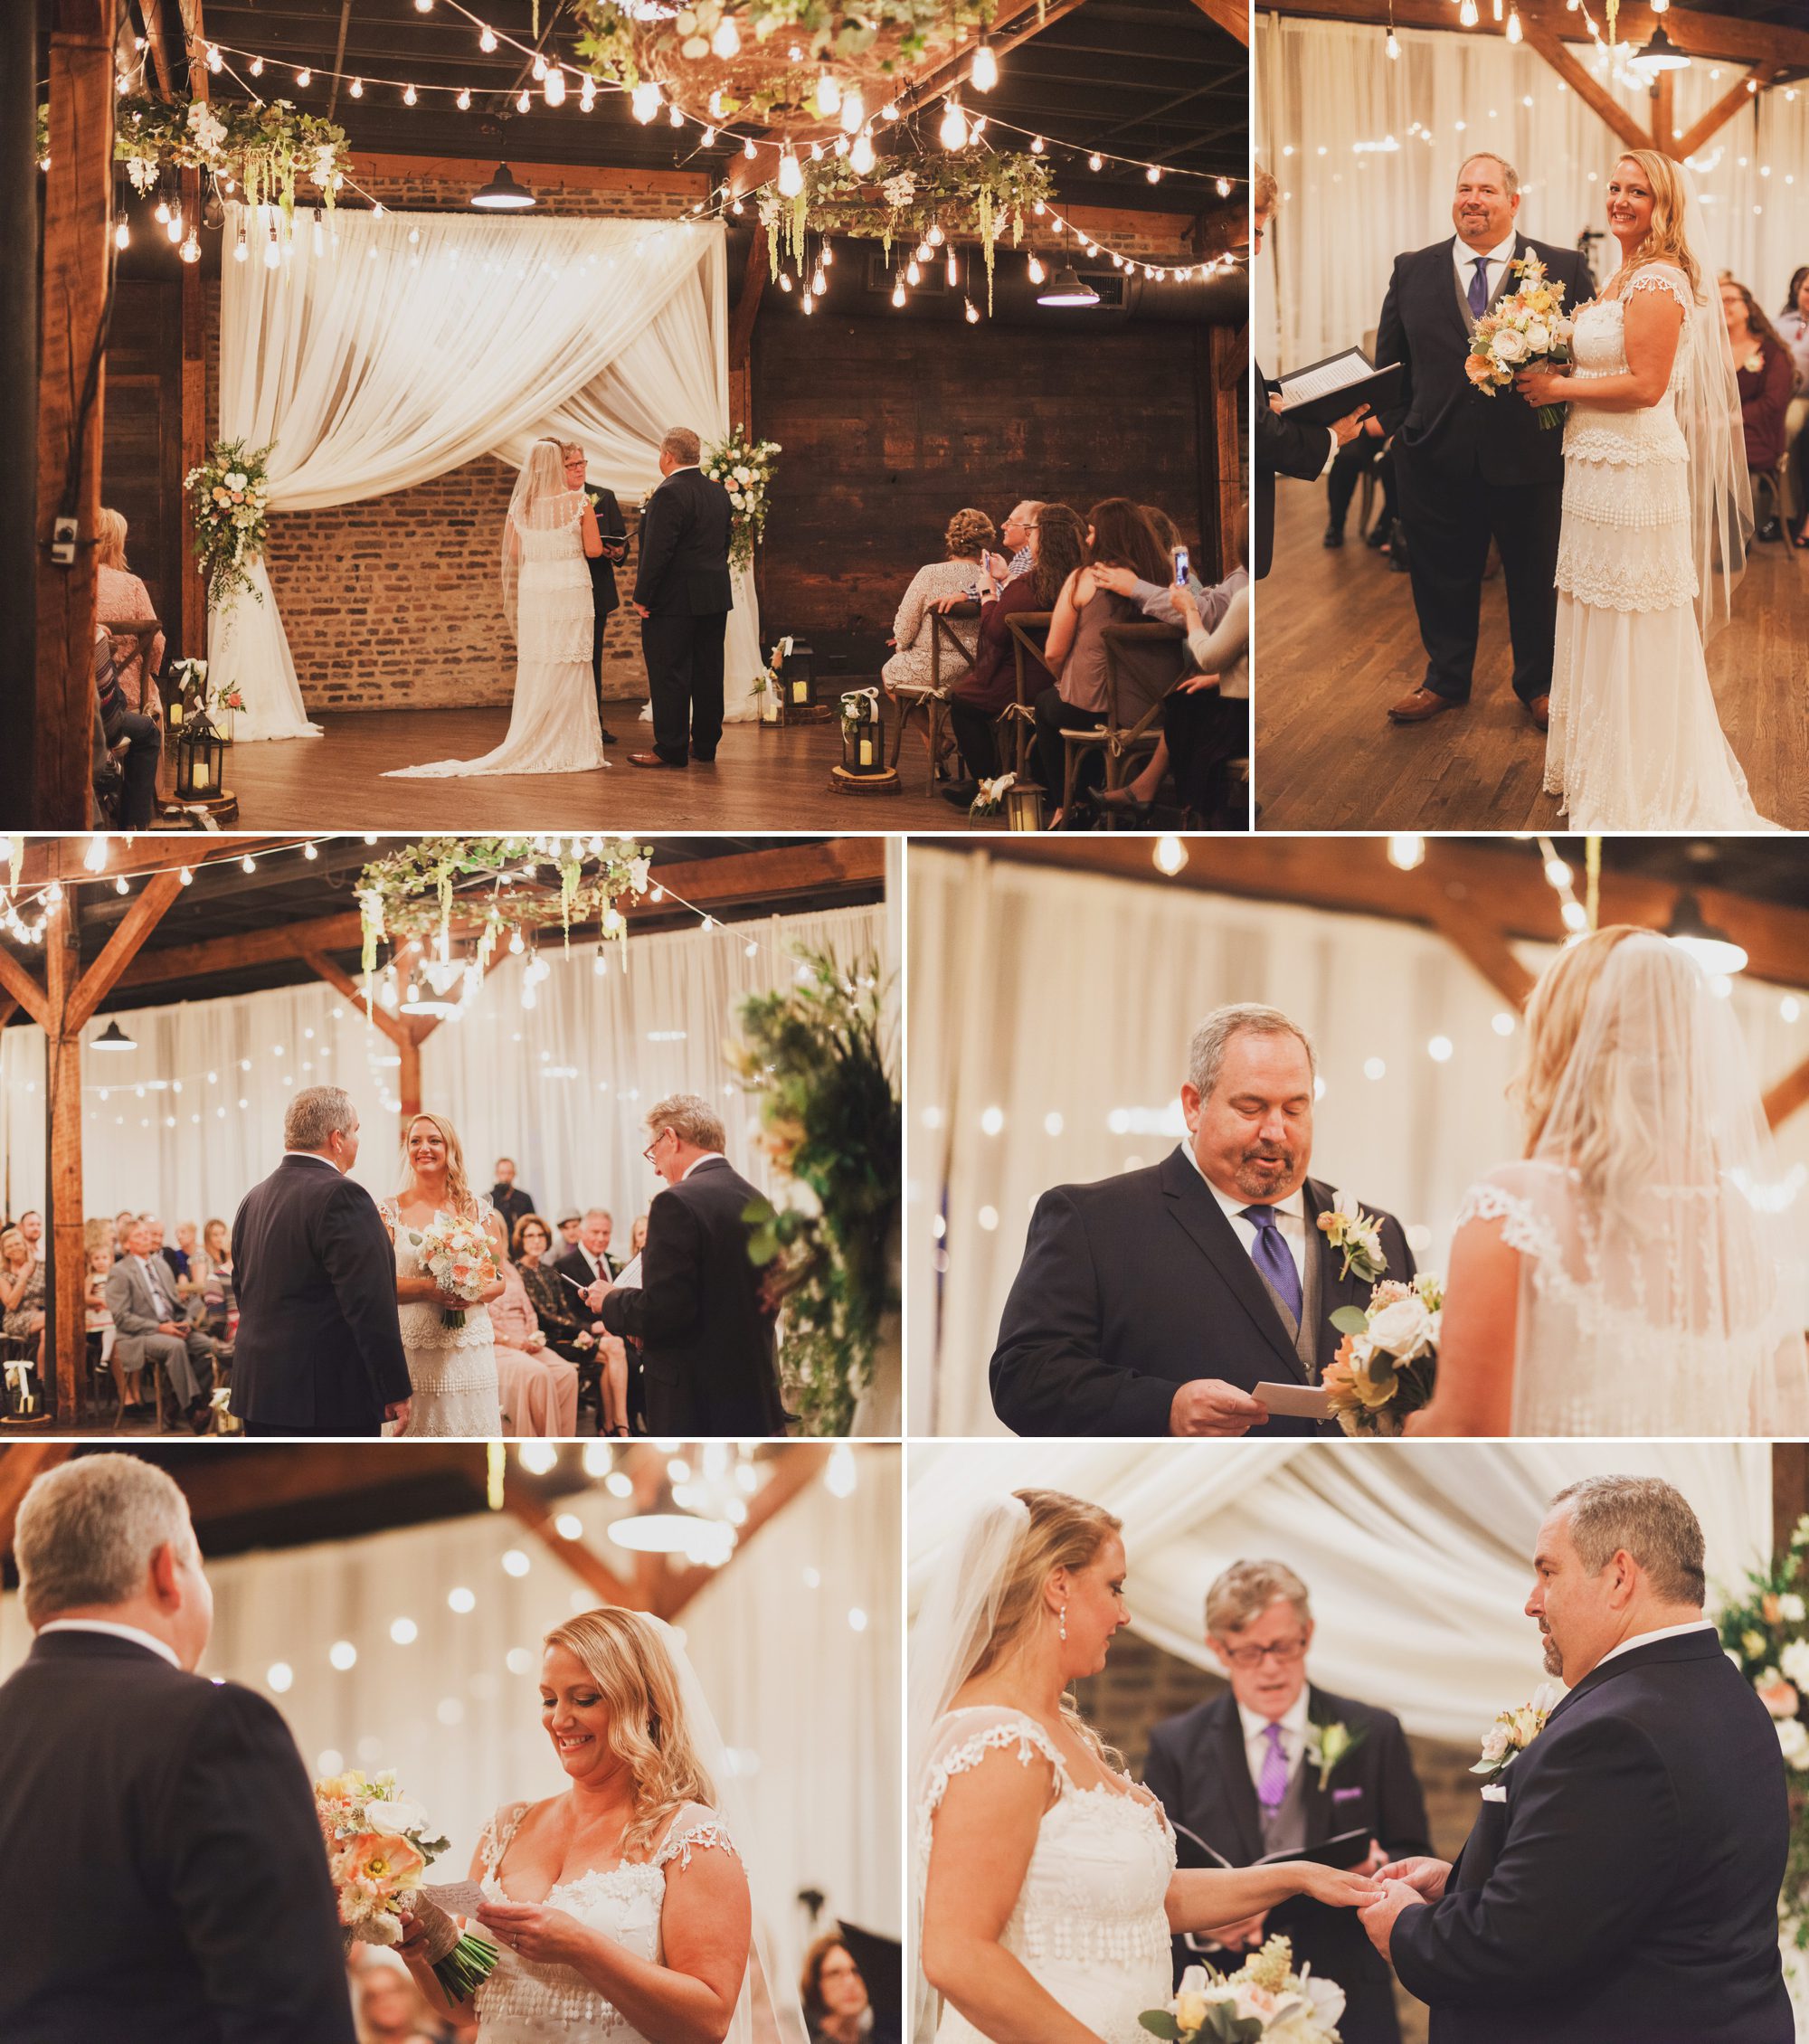 Industrial wedding ceremony  at Houston Station, Nashville TN. Photos by Krista Lee Photography.